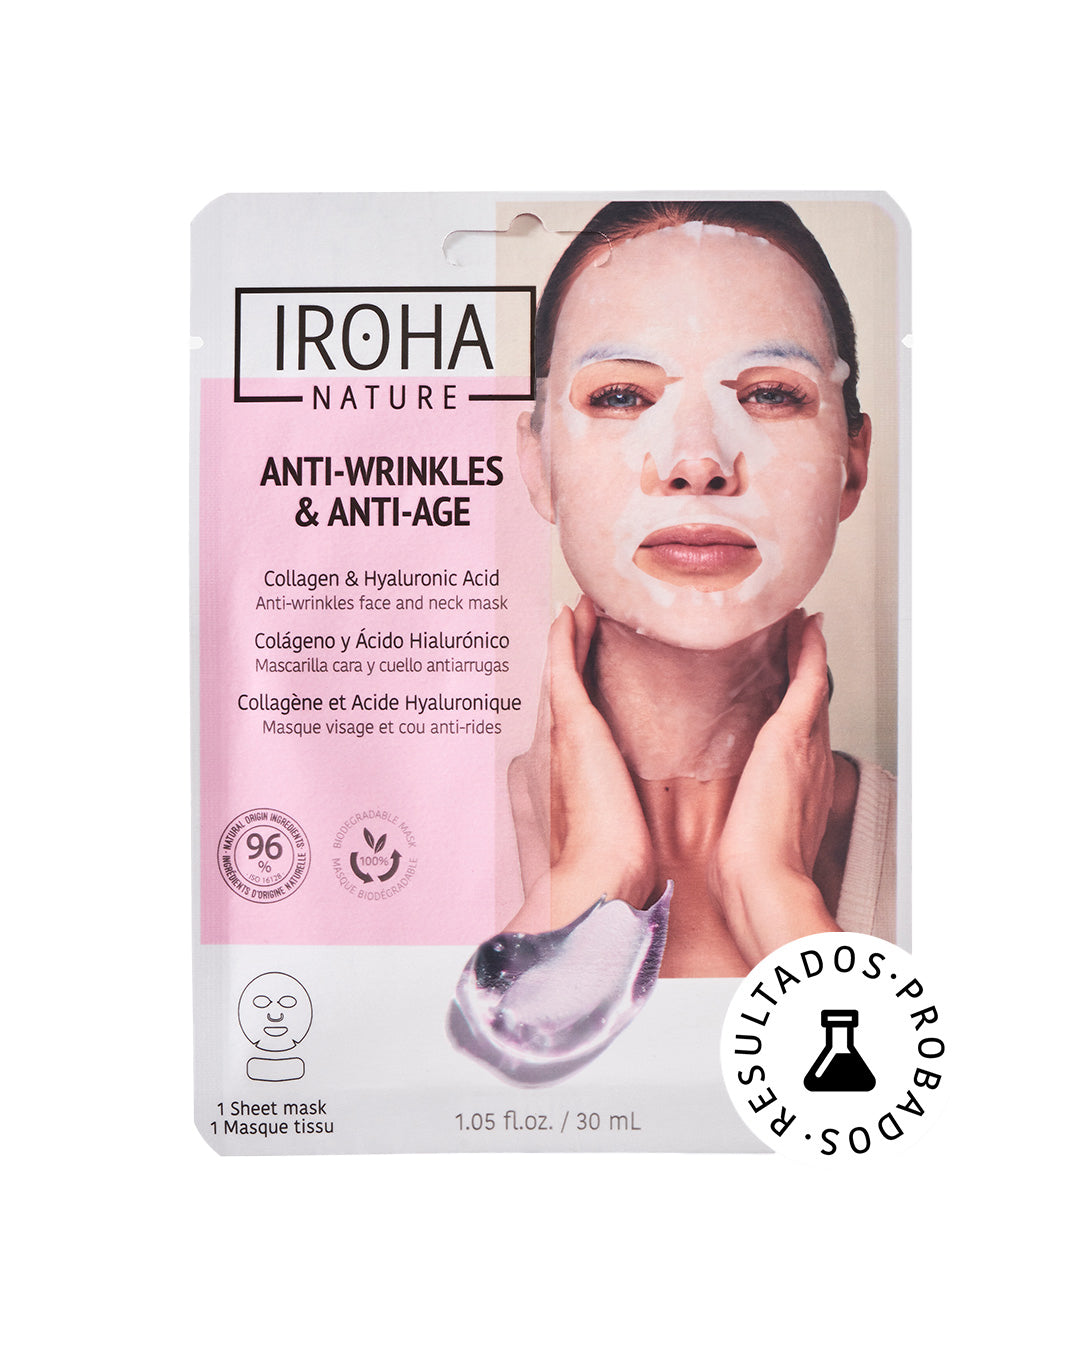 

Iroha Nature Disposable Fabric Face Mask with Collagen and Hyaluronic Acid for Wrinkle and Anti-Aging Care, 1 piece x 30 ml.